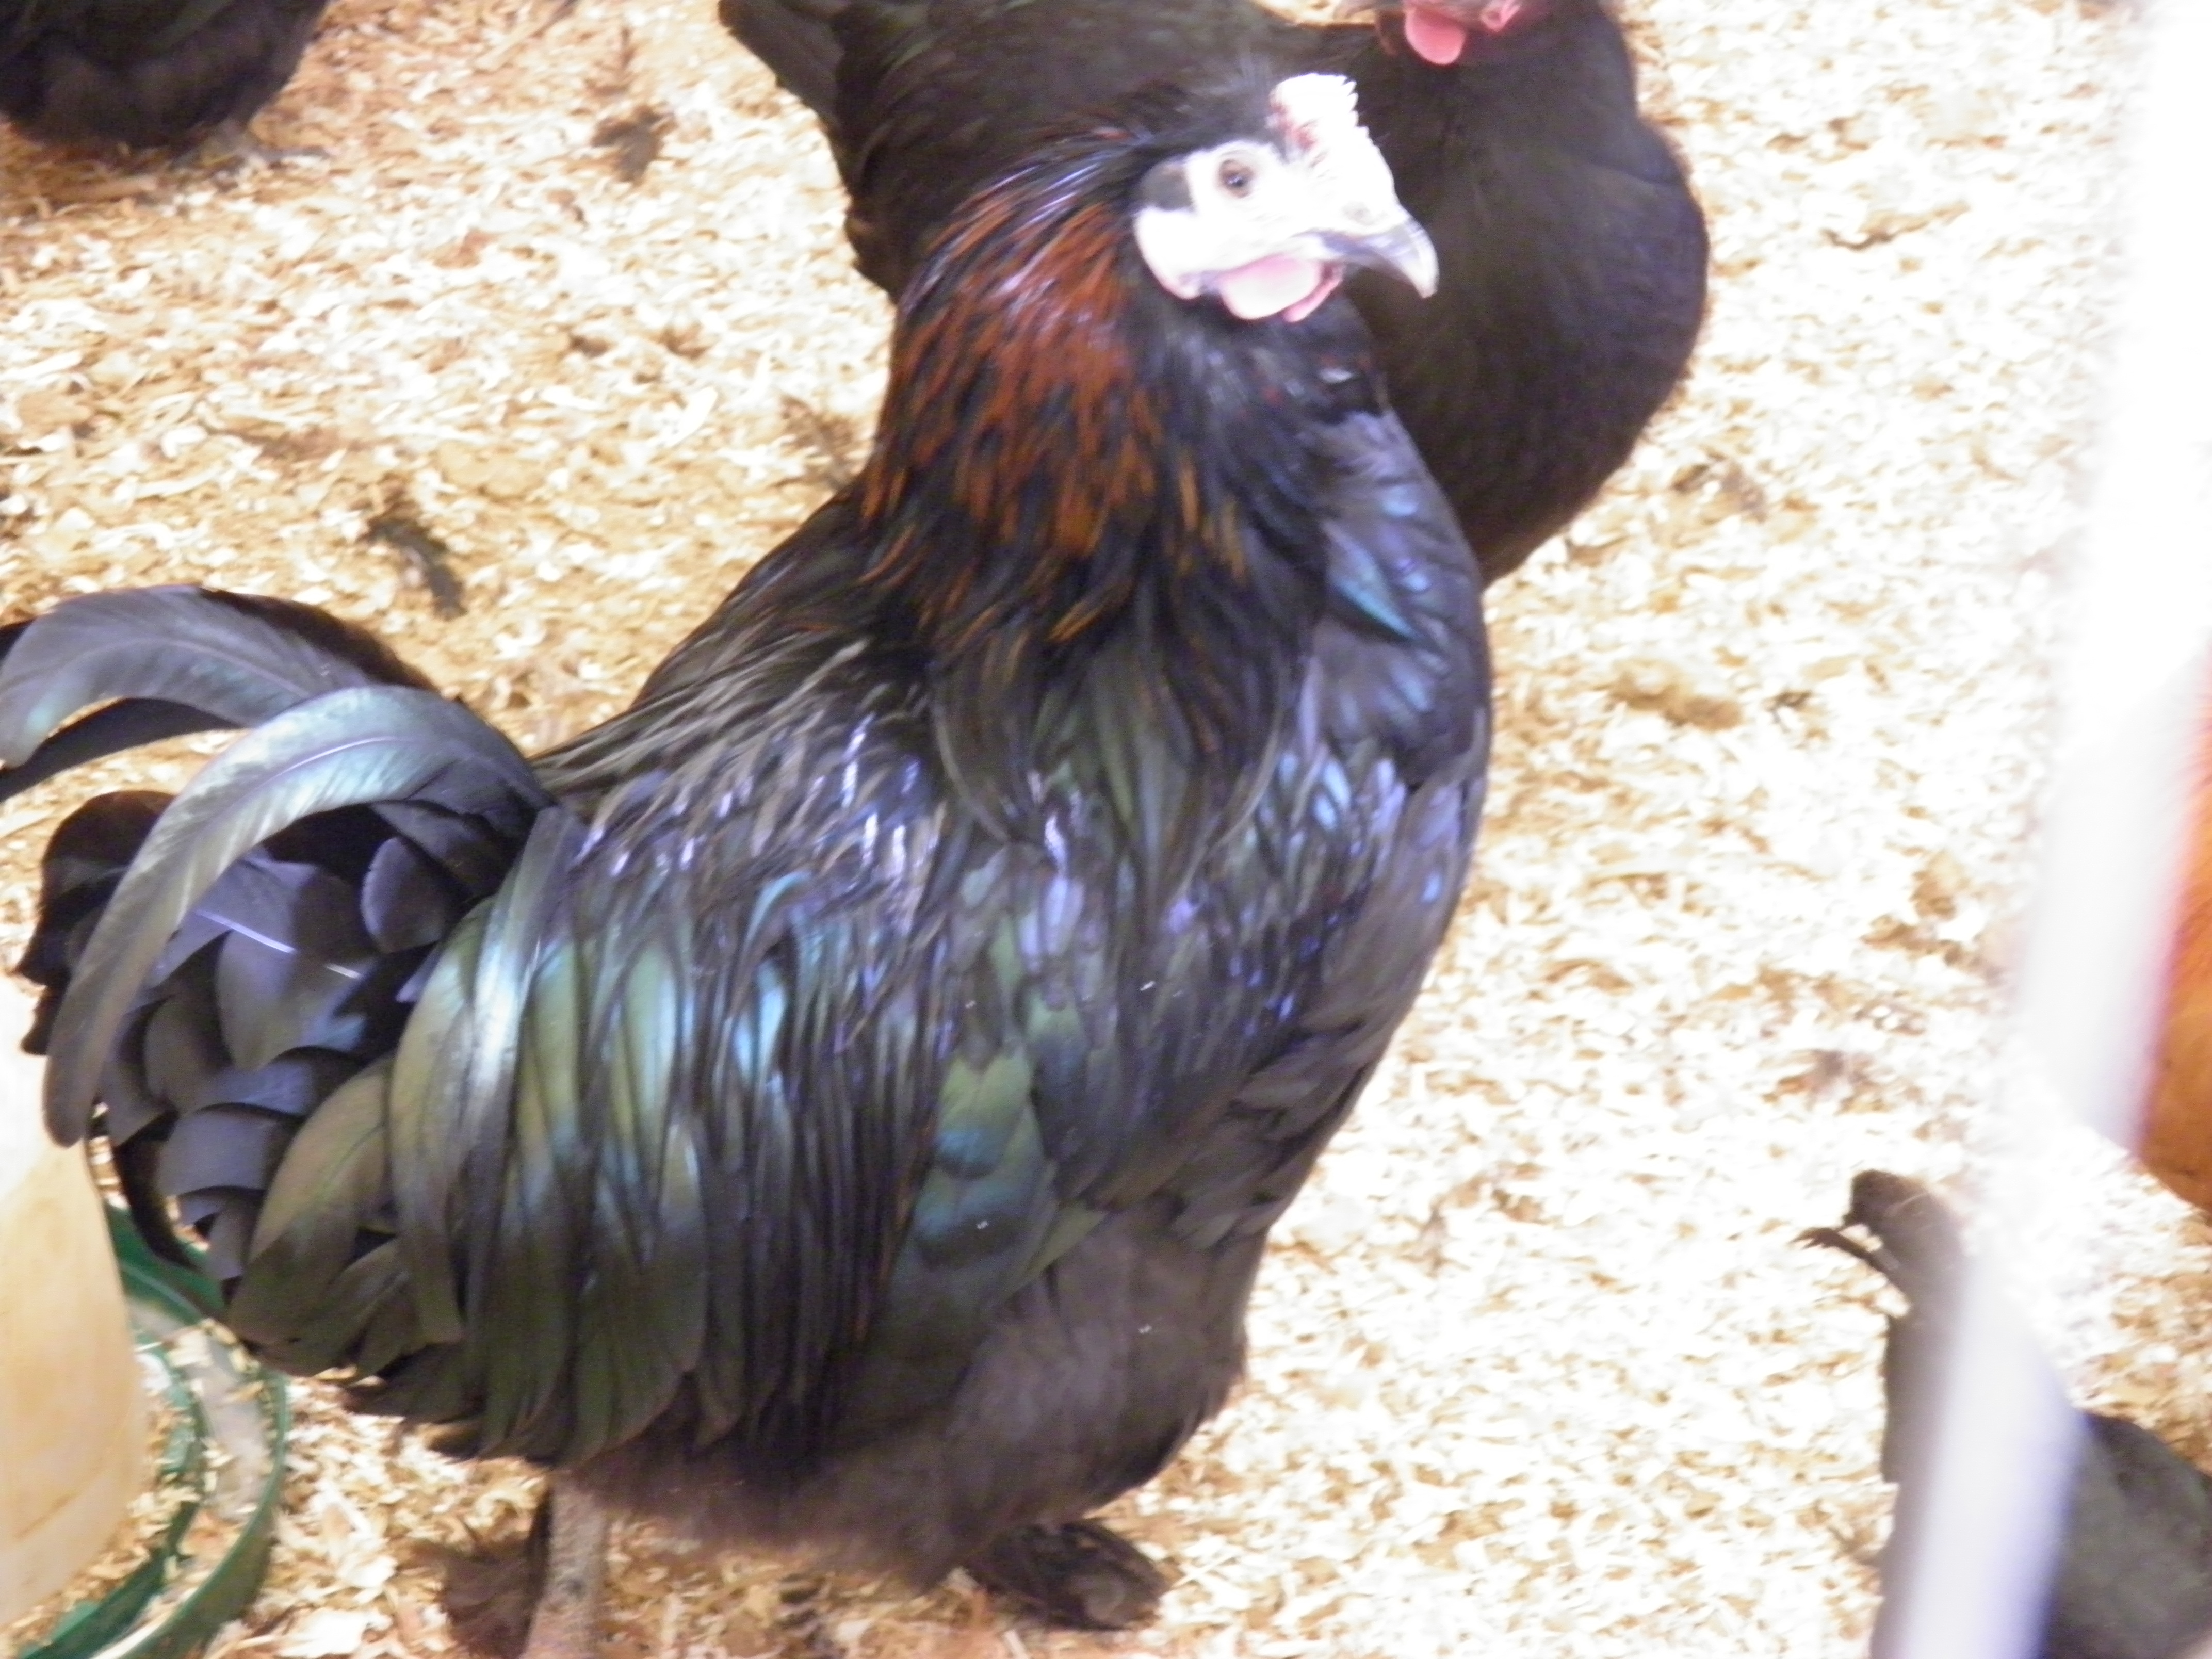 25 week old capon.  BCM X Lavender Orpington.  Weight 8lb3oz